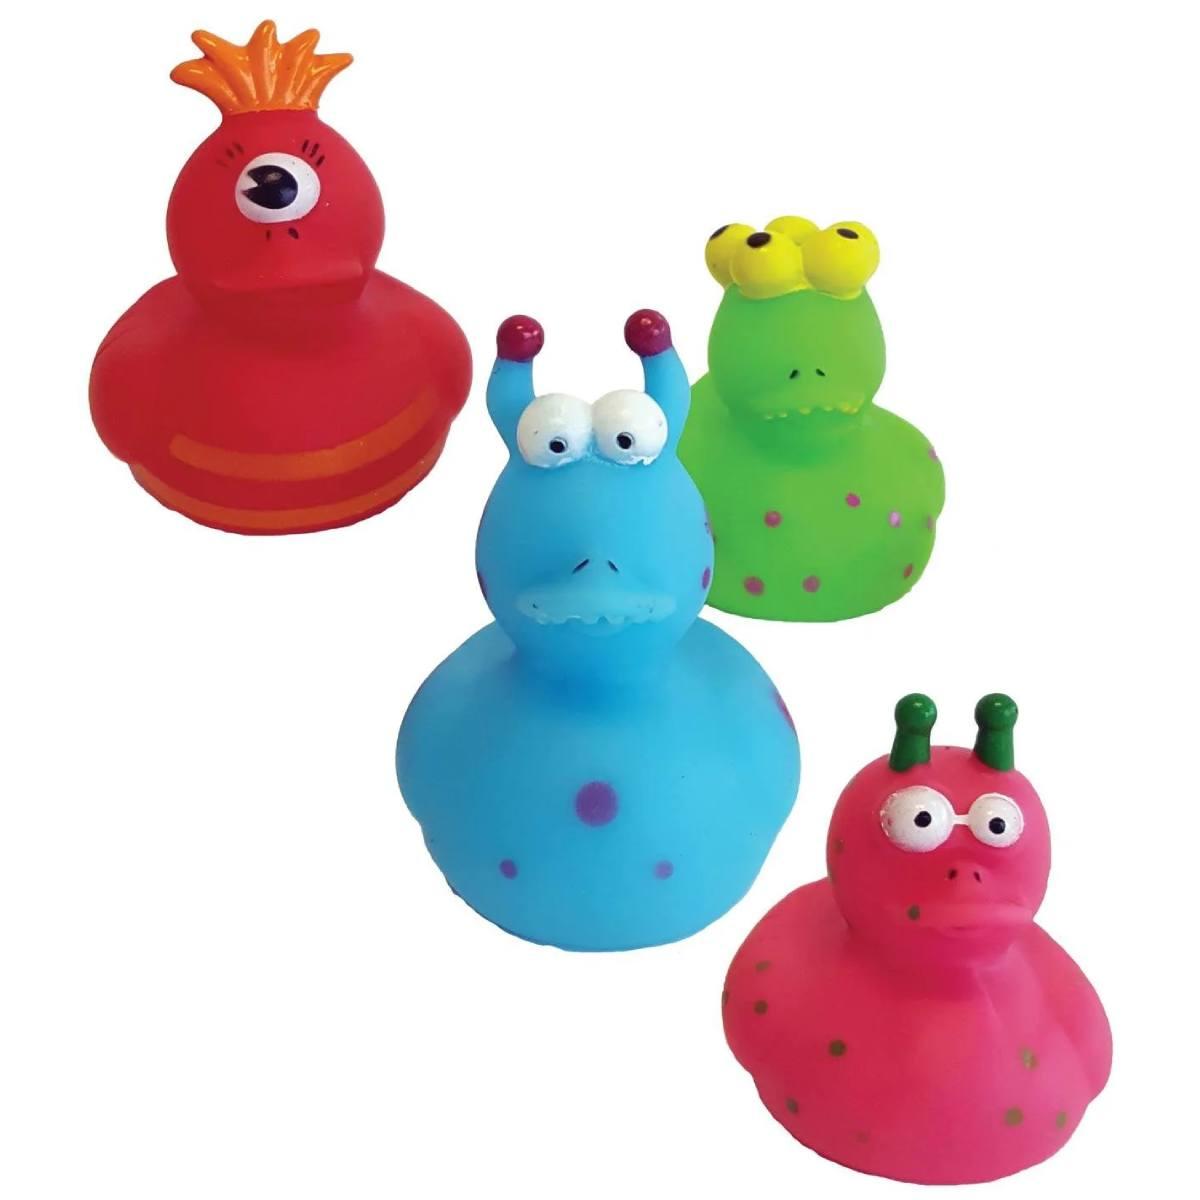 Alien Rubber Ducks by Amscan 9902054 available here at Karnival Costumes online party shop